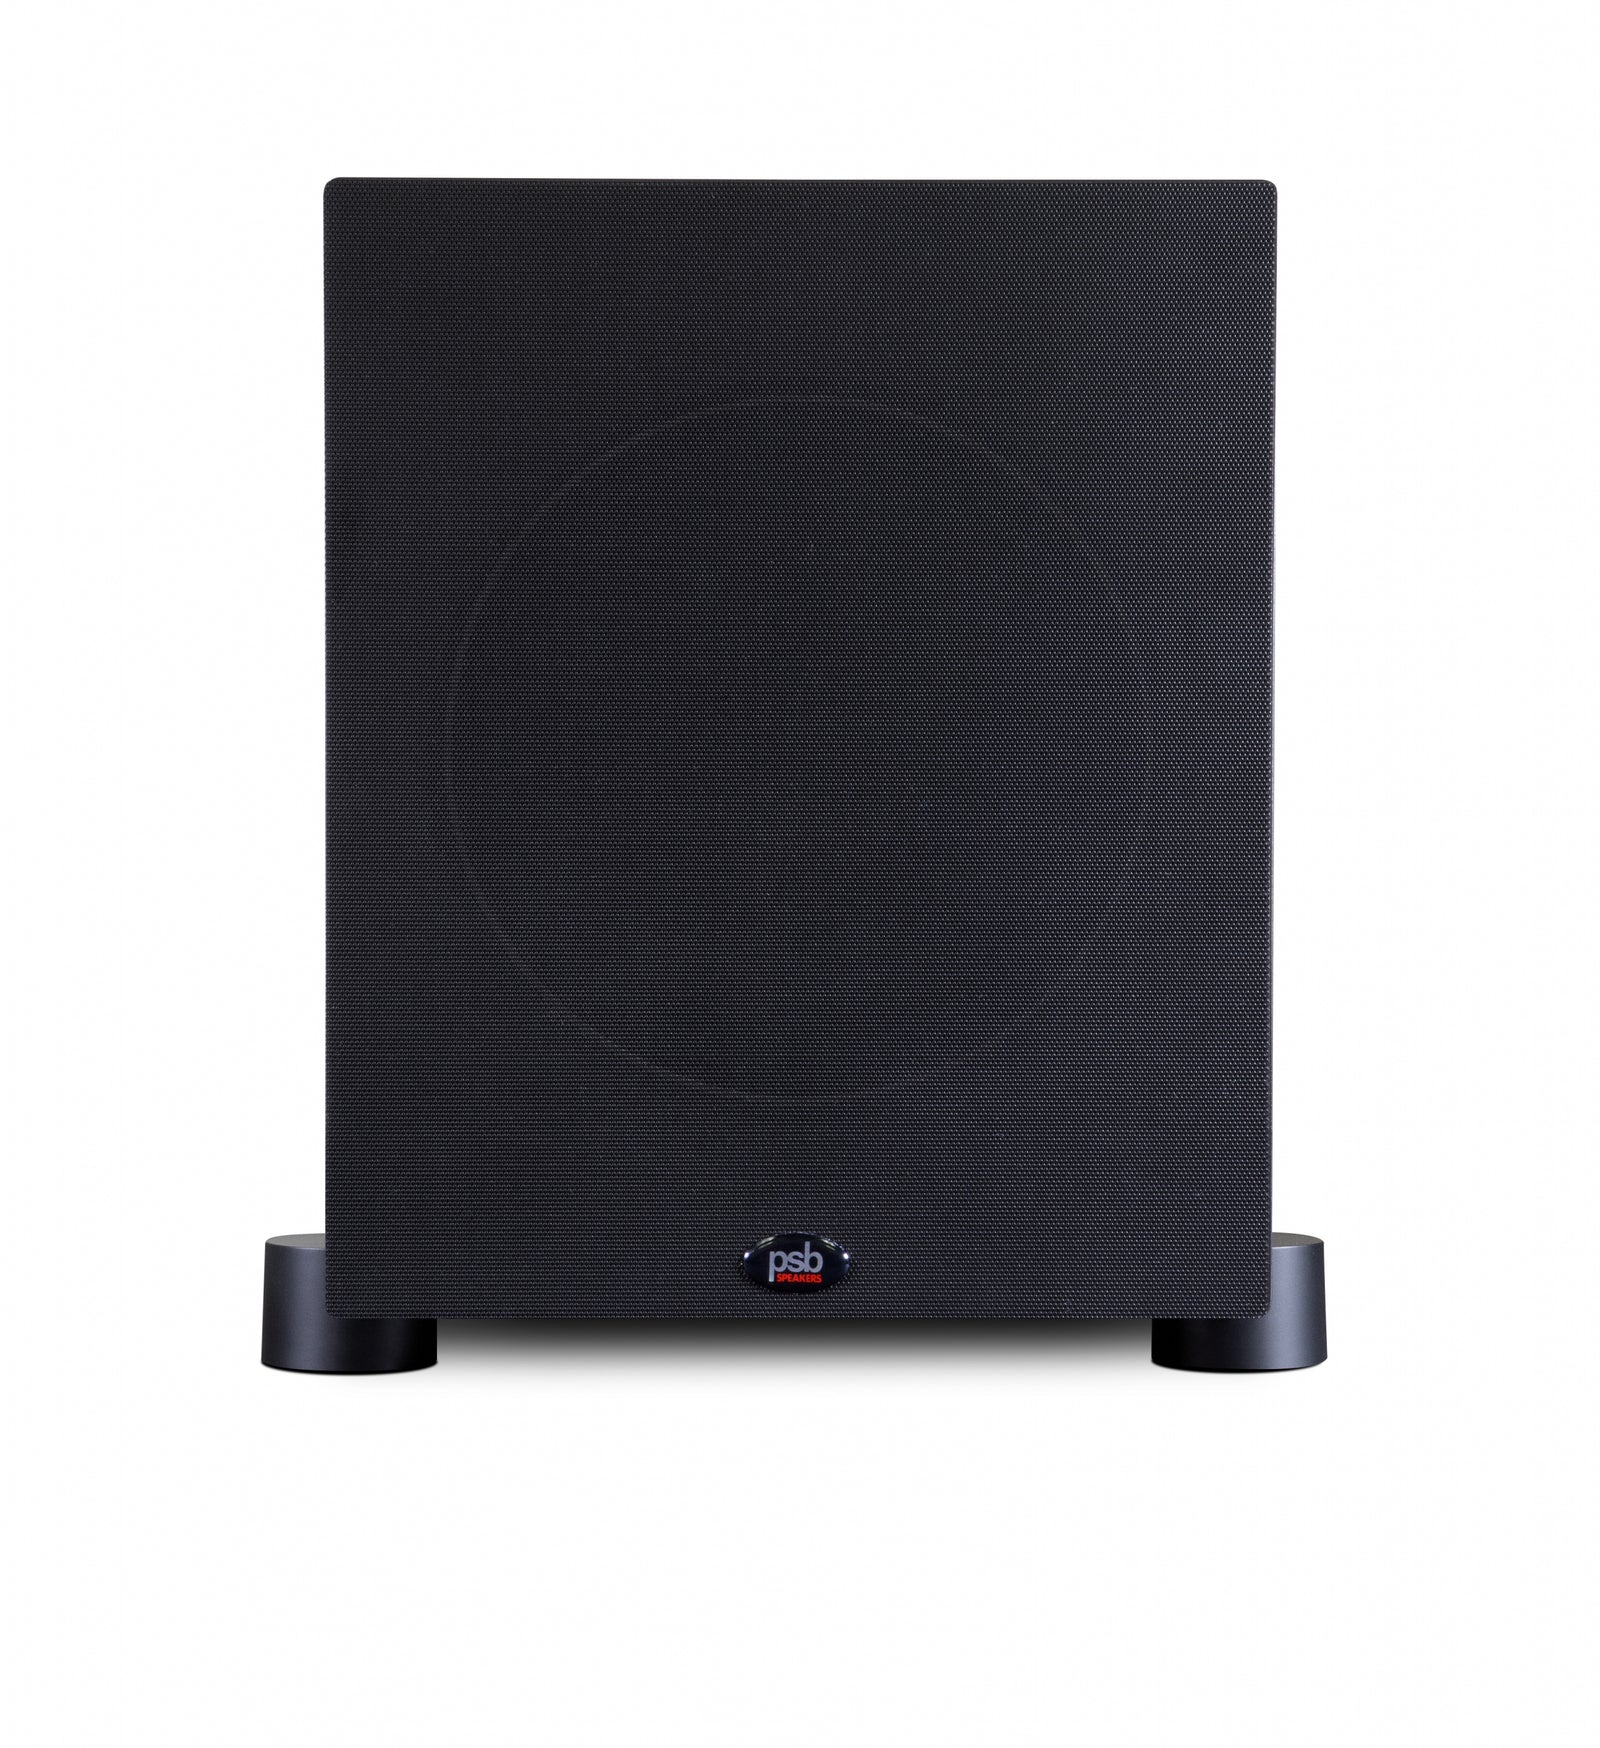 PSB ALPHA S8 - 8" POWERED SUBWOOFER. PSB Speakers is a Canada's leading manufacturer of top-performing and for high quality Audio Speakers, headphones, loudspeakers, subwoofers, Home Theater Systems, Floorstanding Speakers, Bookshelf Speakers, loudspeakers and more available here at Vinyl Sound.